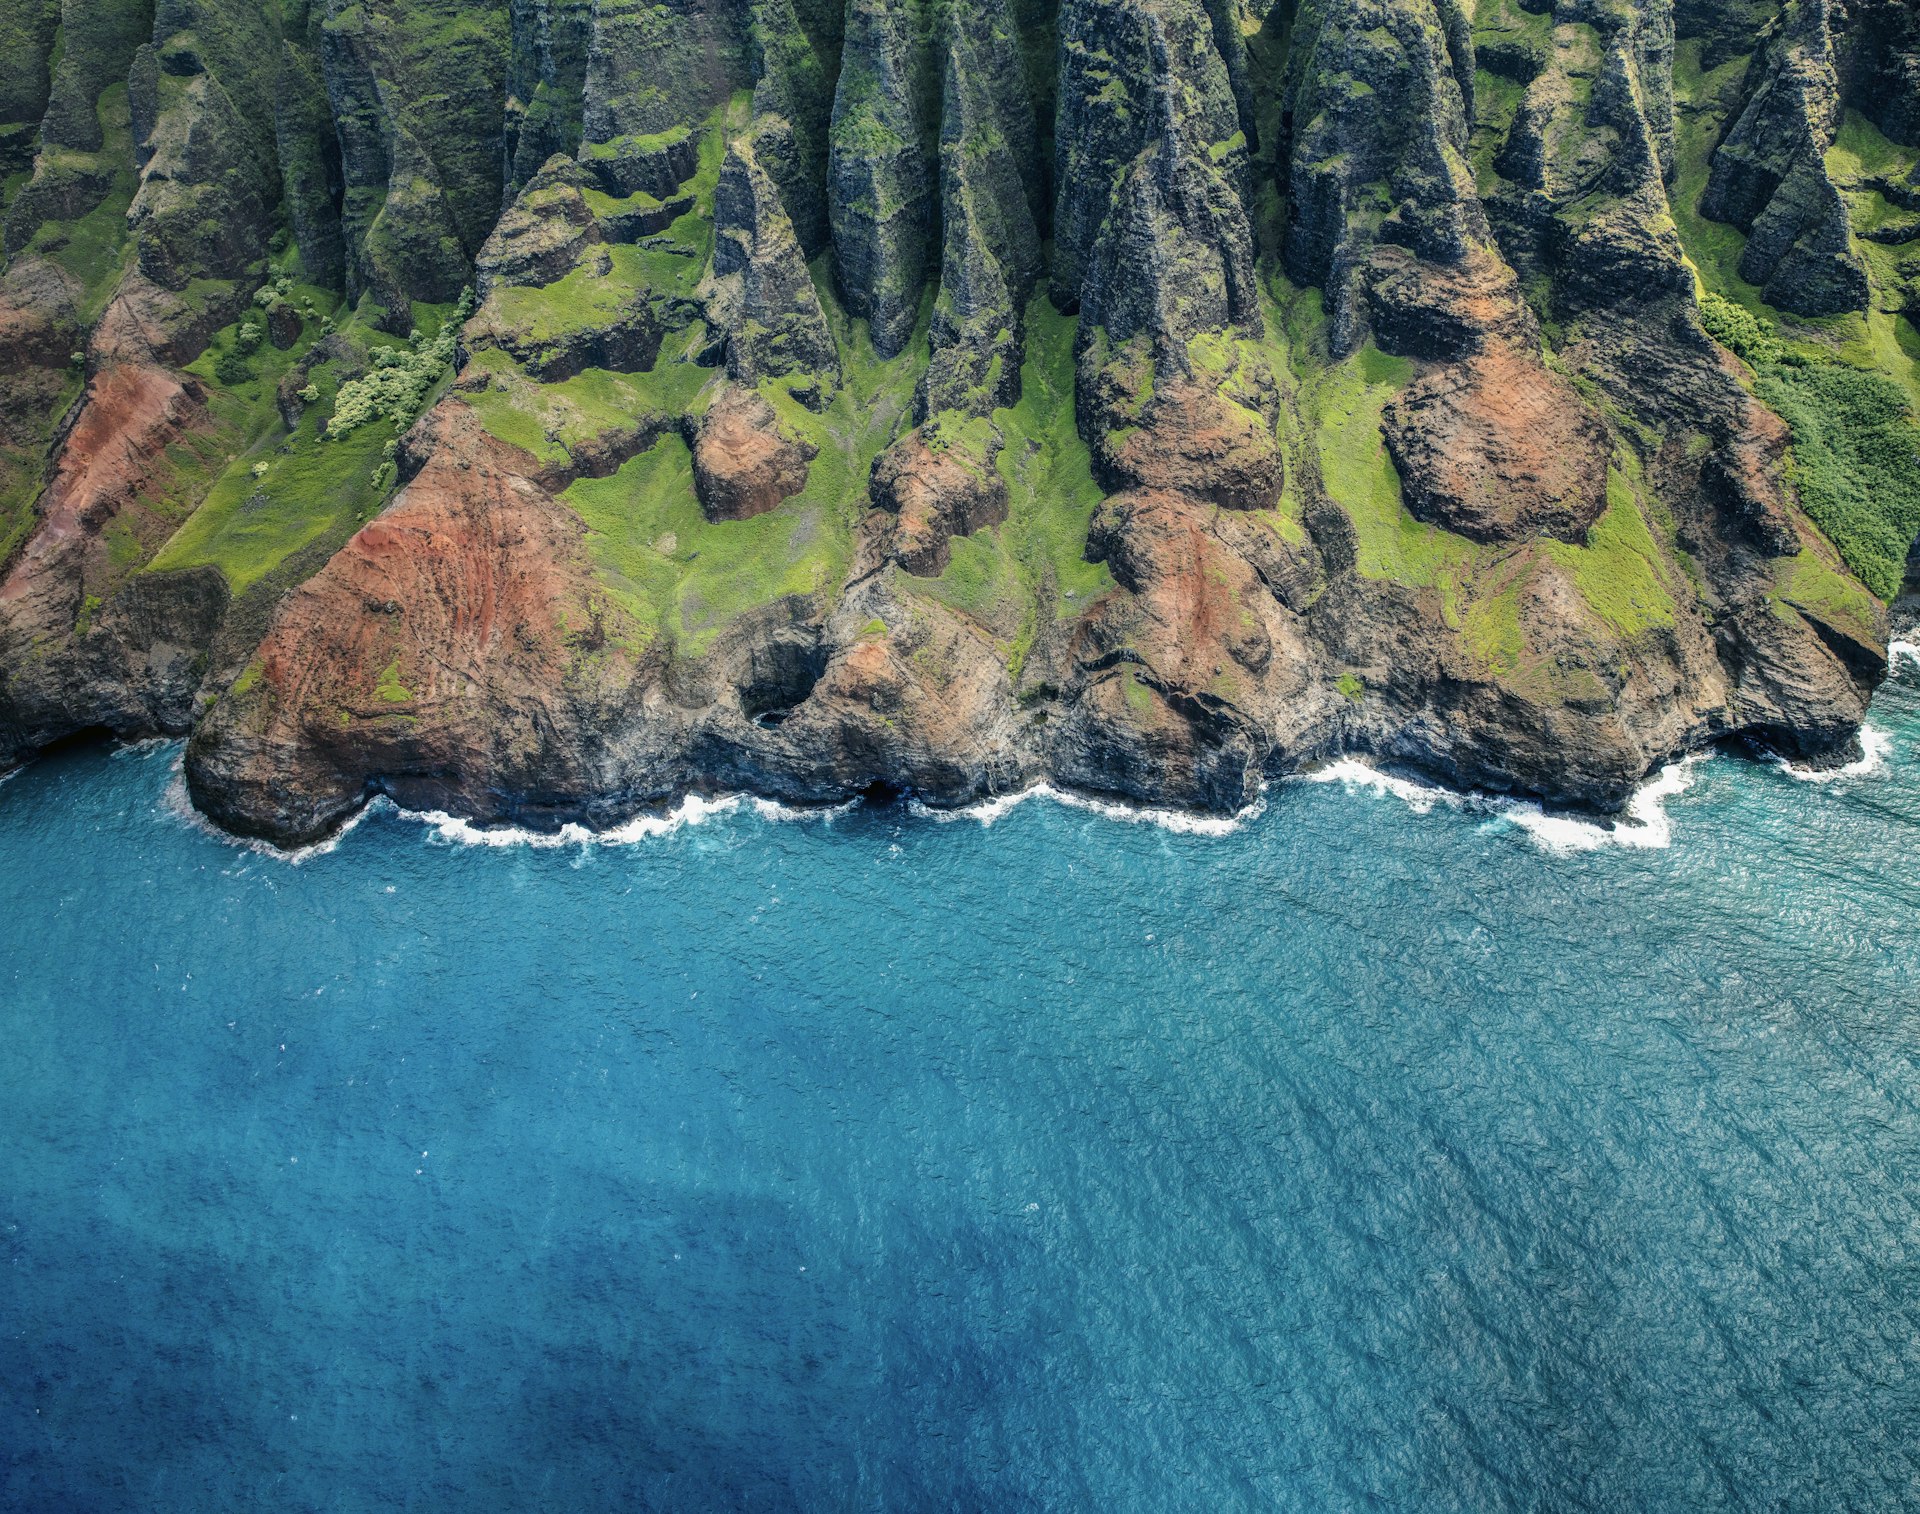 The rugged coast of Kauai as seen from a helicopter above